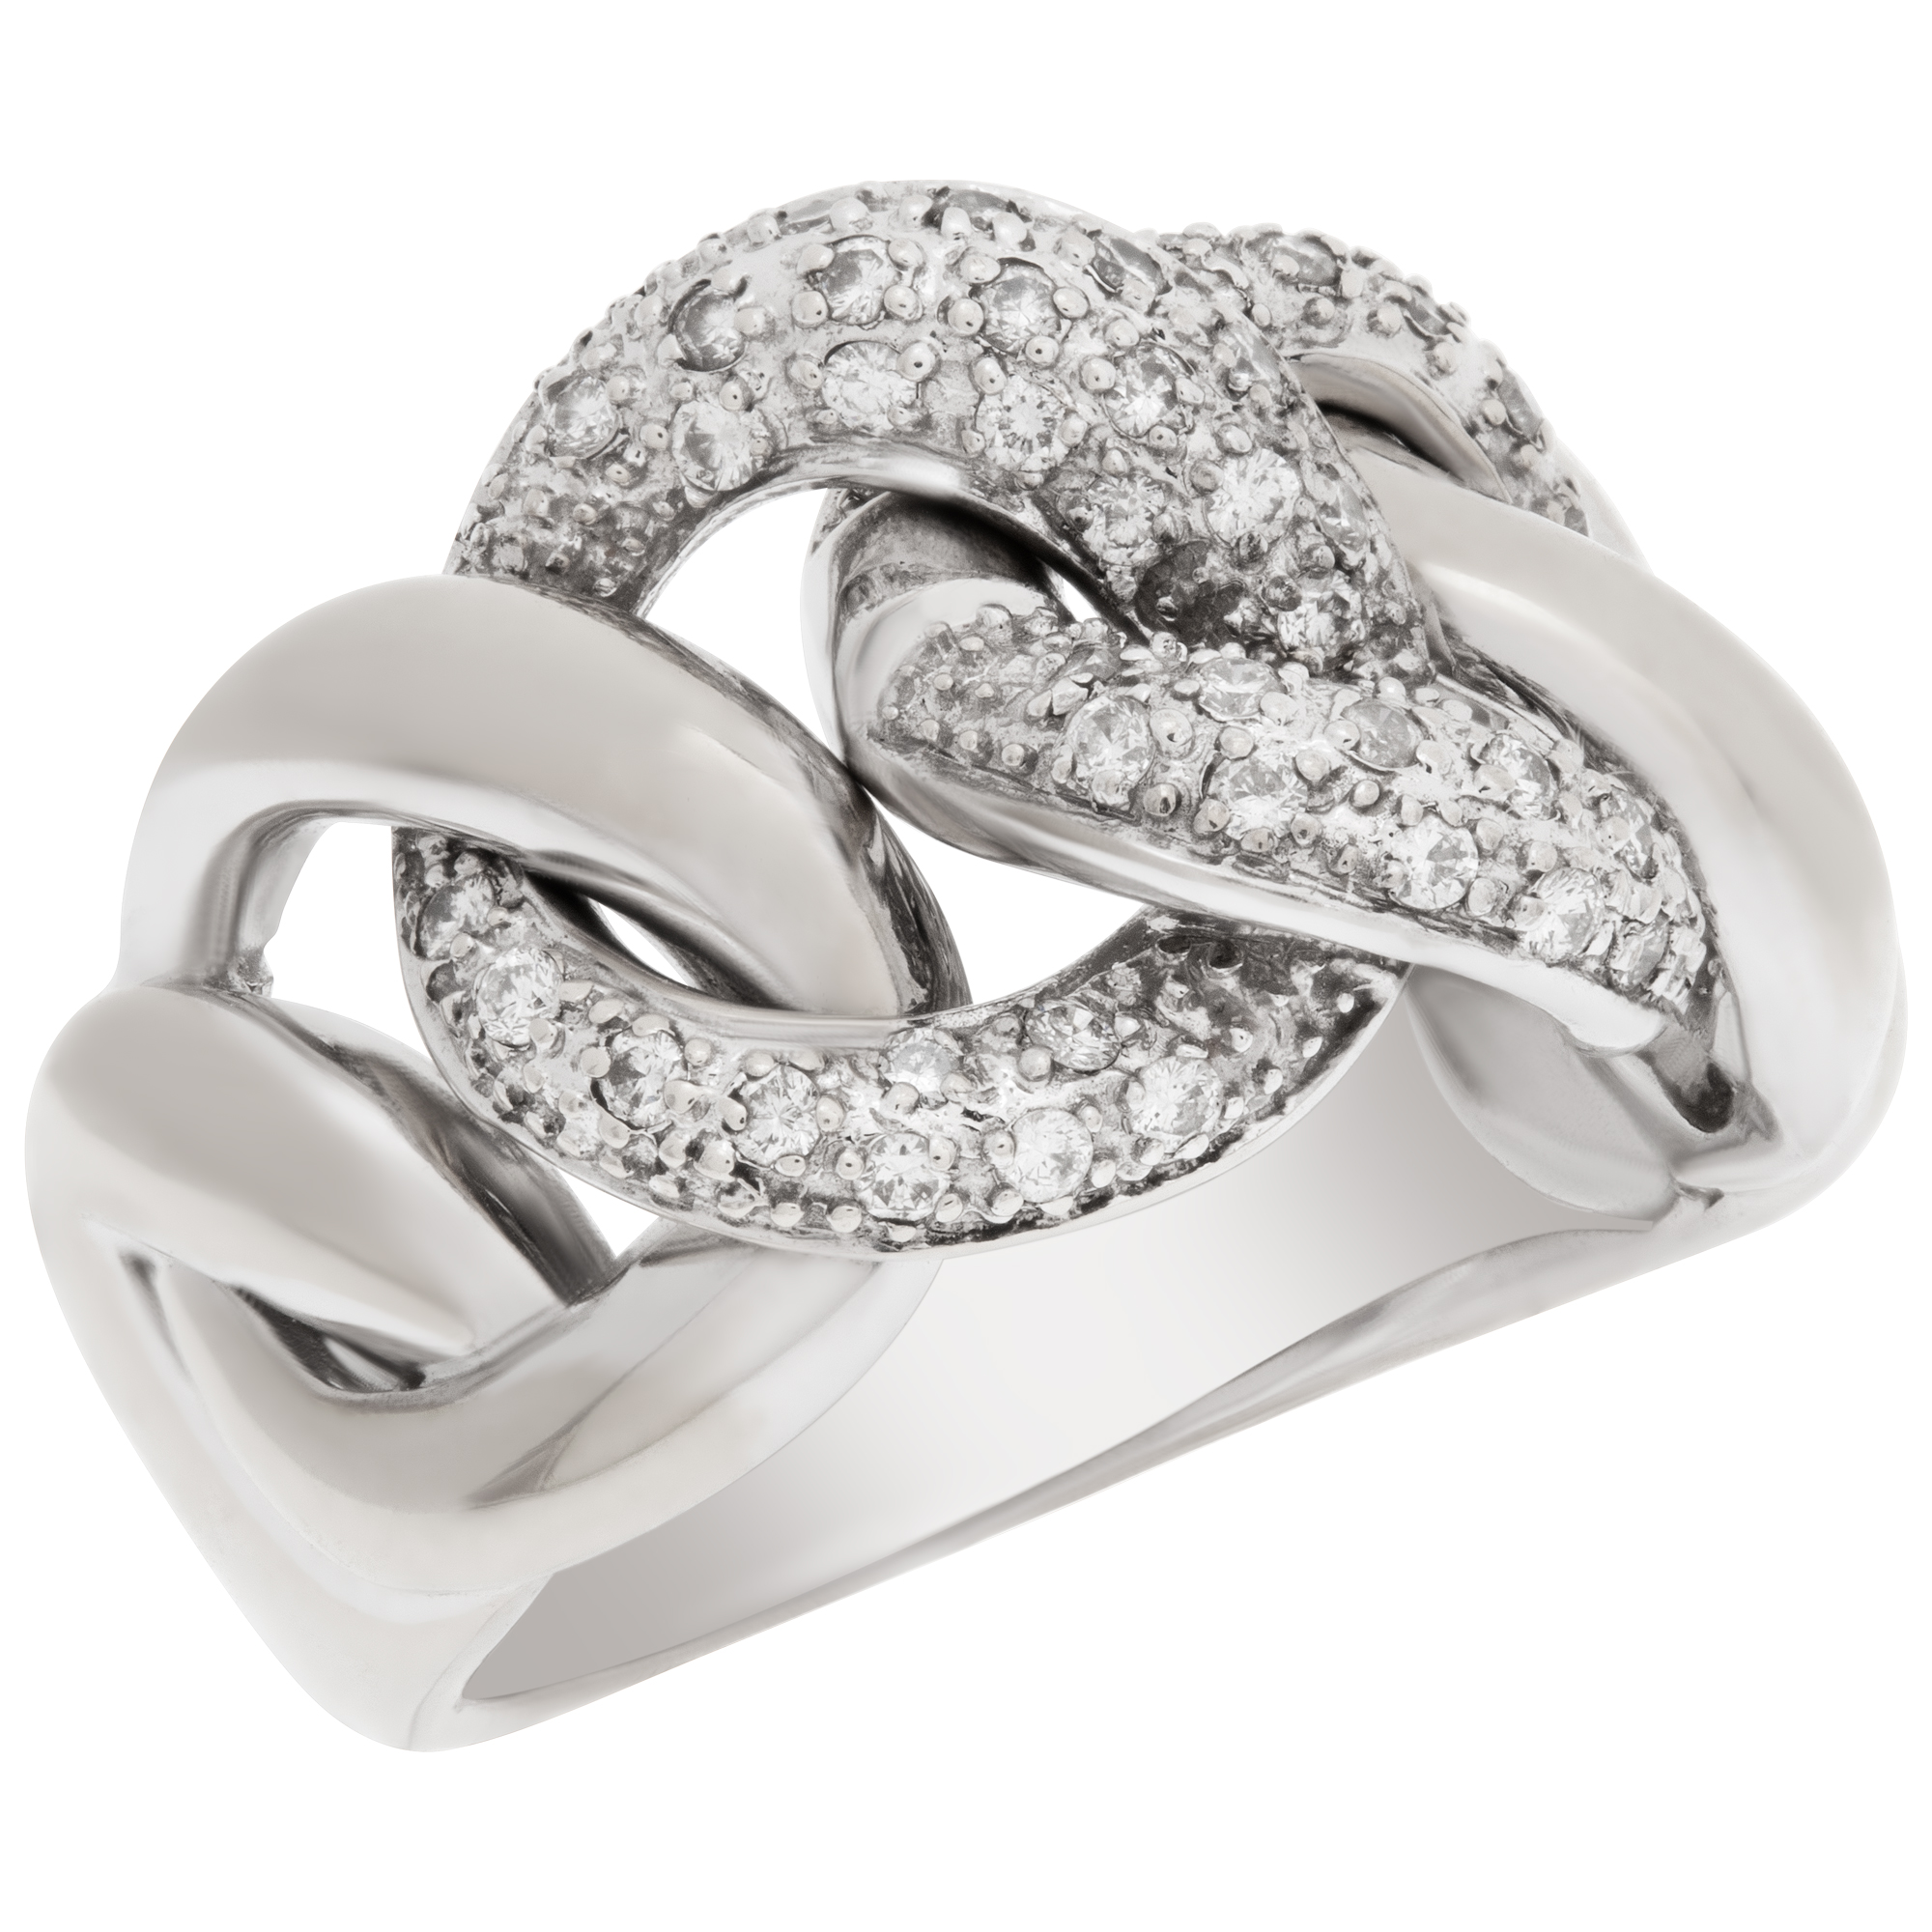 Pave Diamond link ring in 14k white gold. 0.50 carats in diamonds. Size 8 image 3